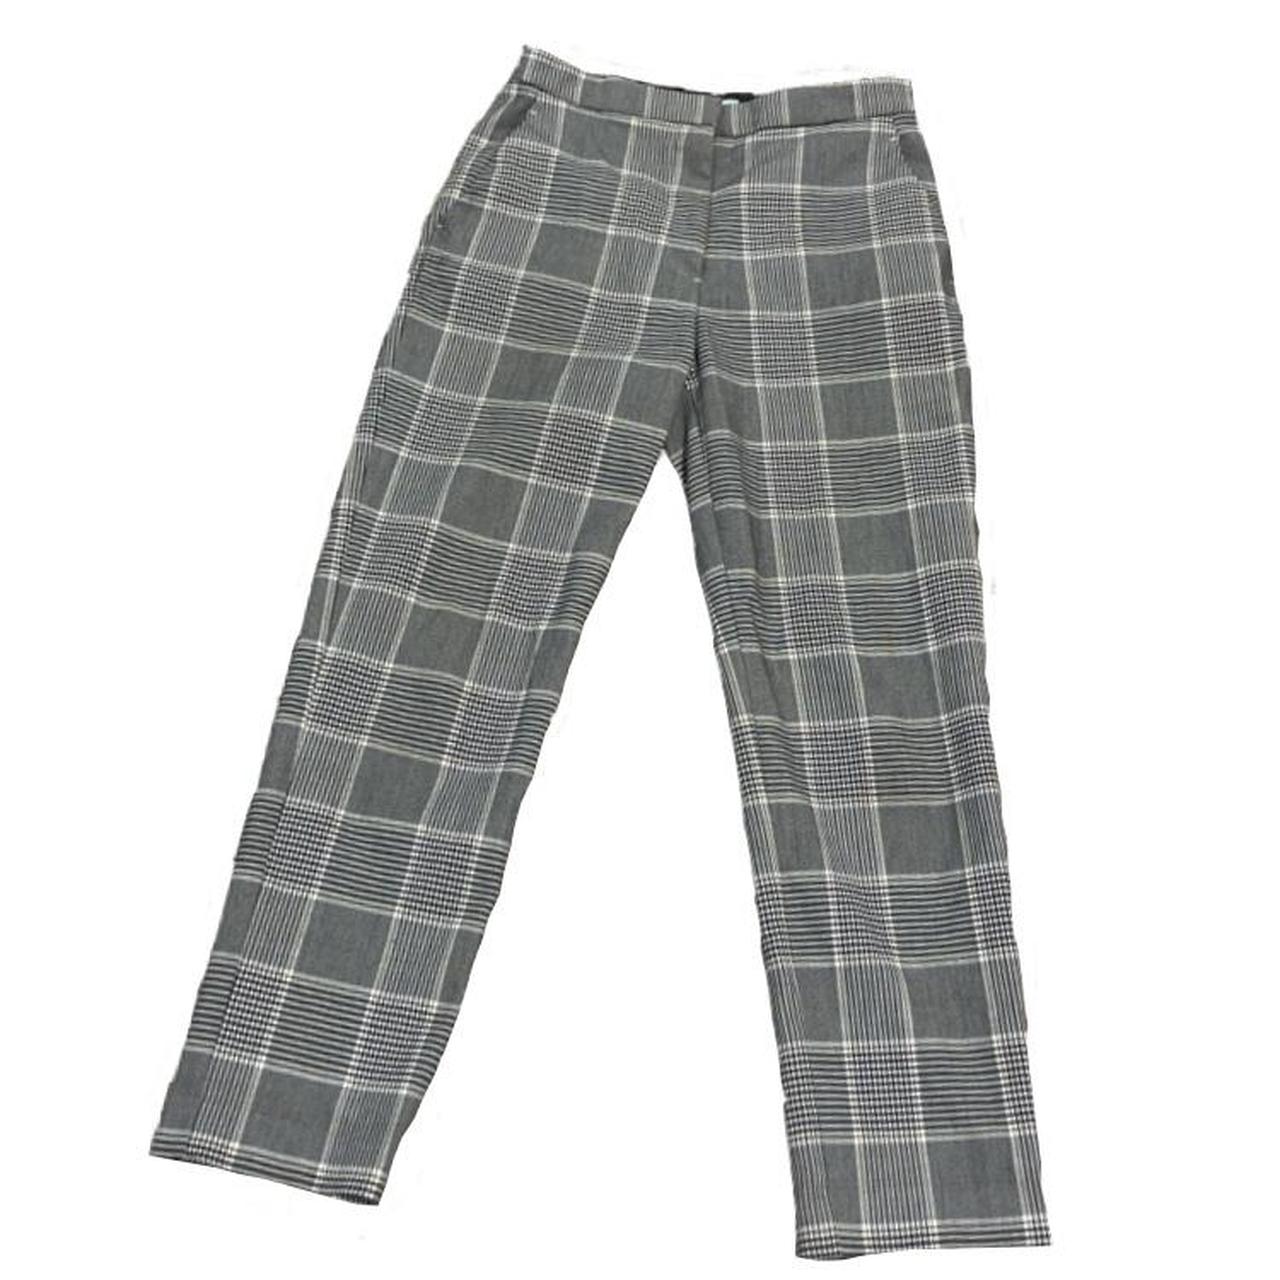 Grey black and white plaid pants from... - Depop